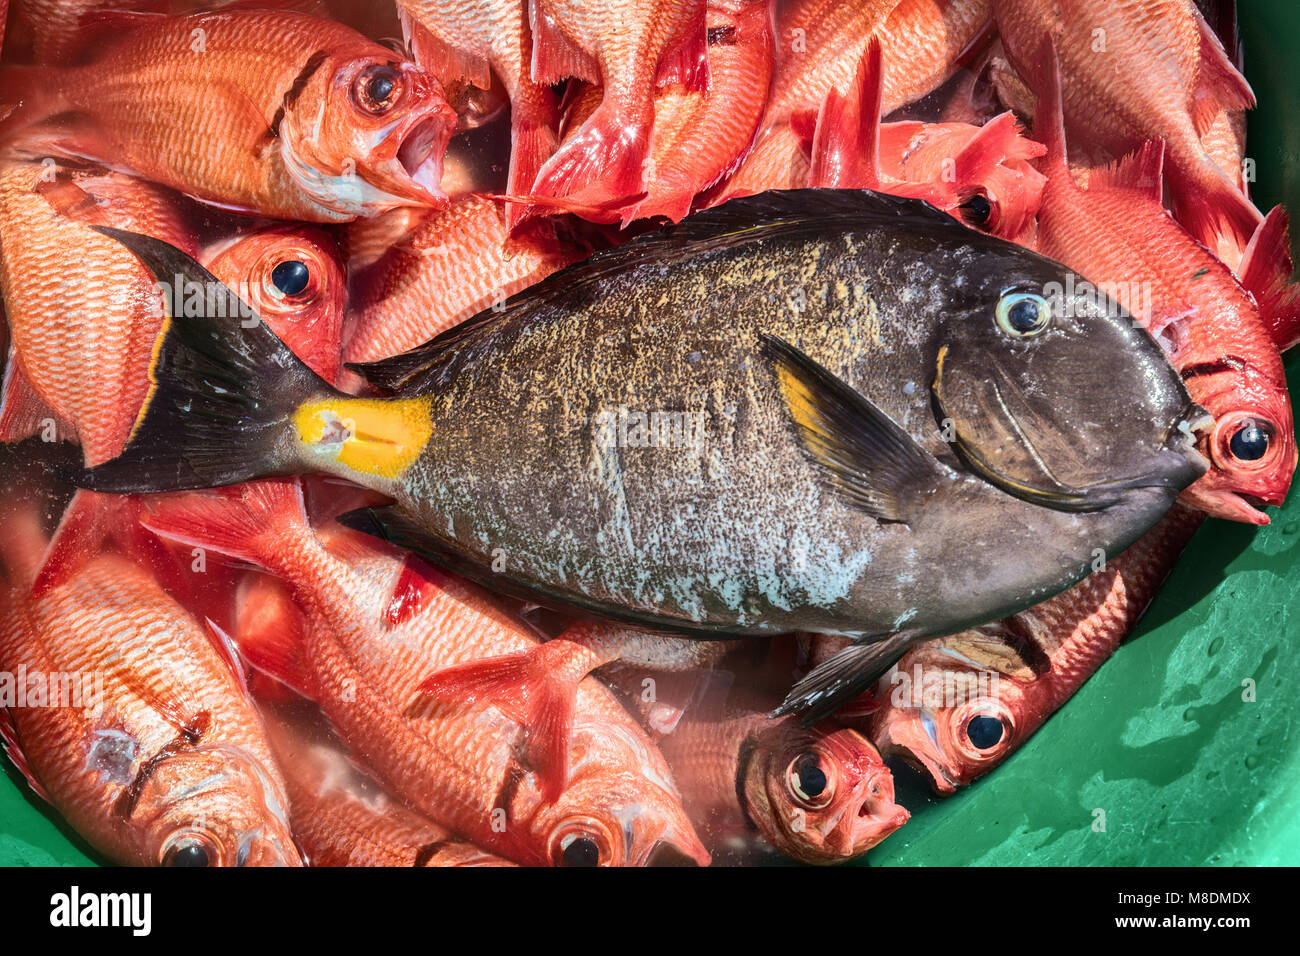 Overhead view of variety of fish in tub, Tarrafal, Cape Verde, Africa Stock Photo